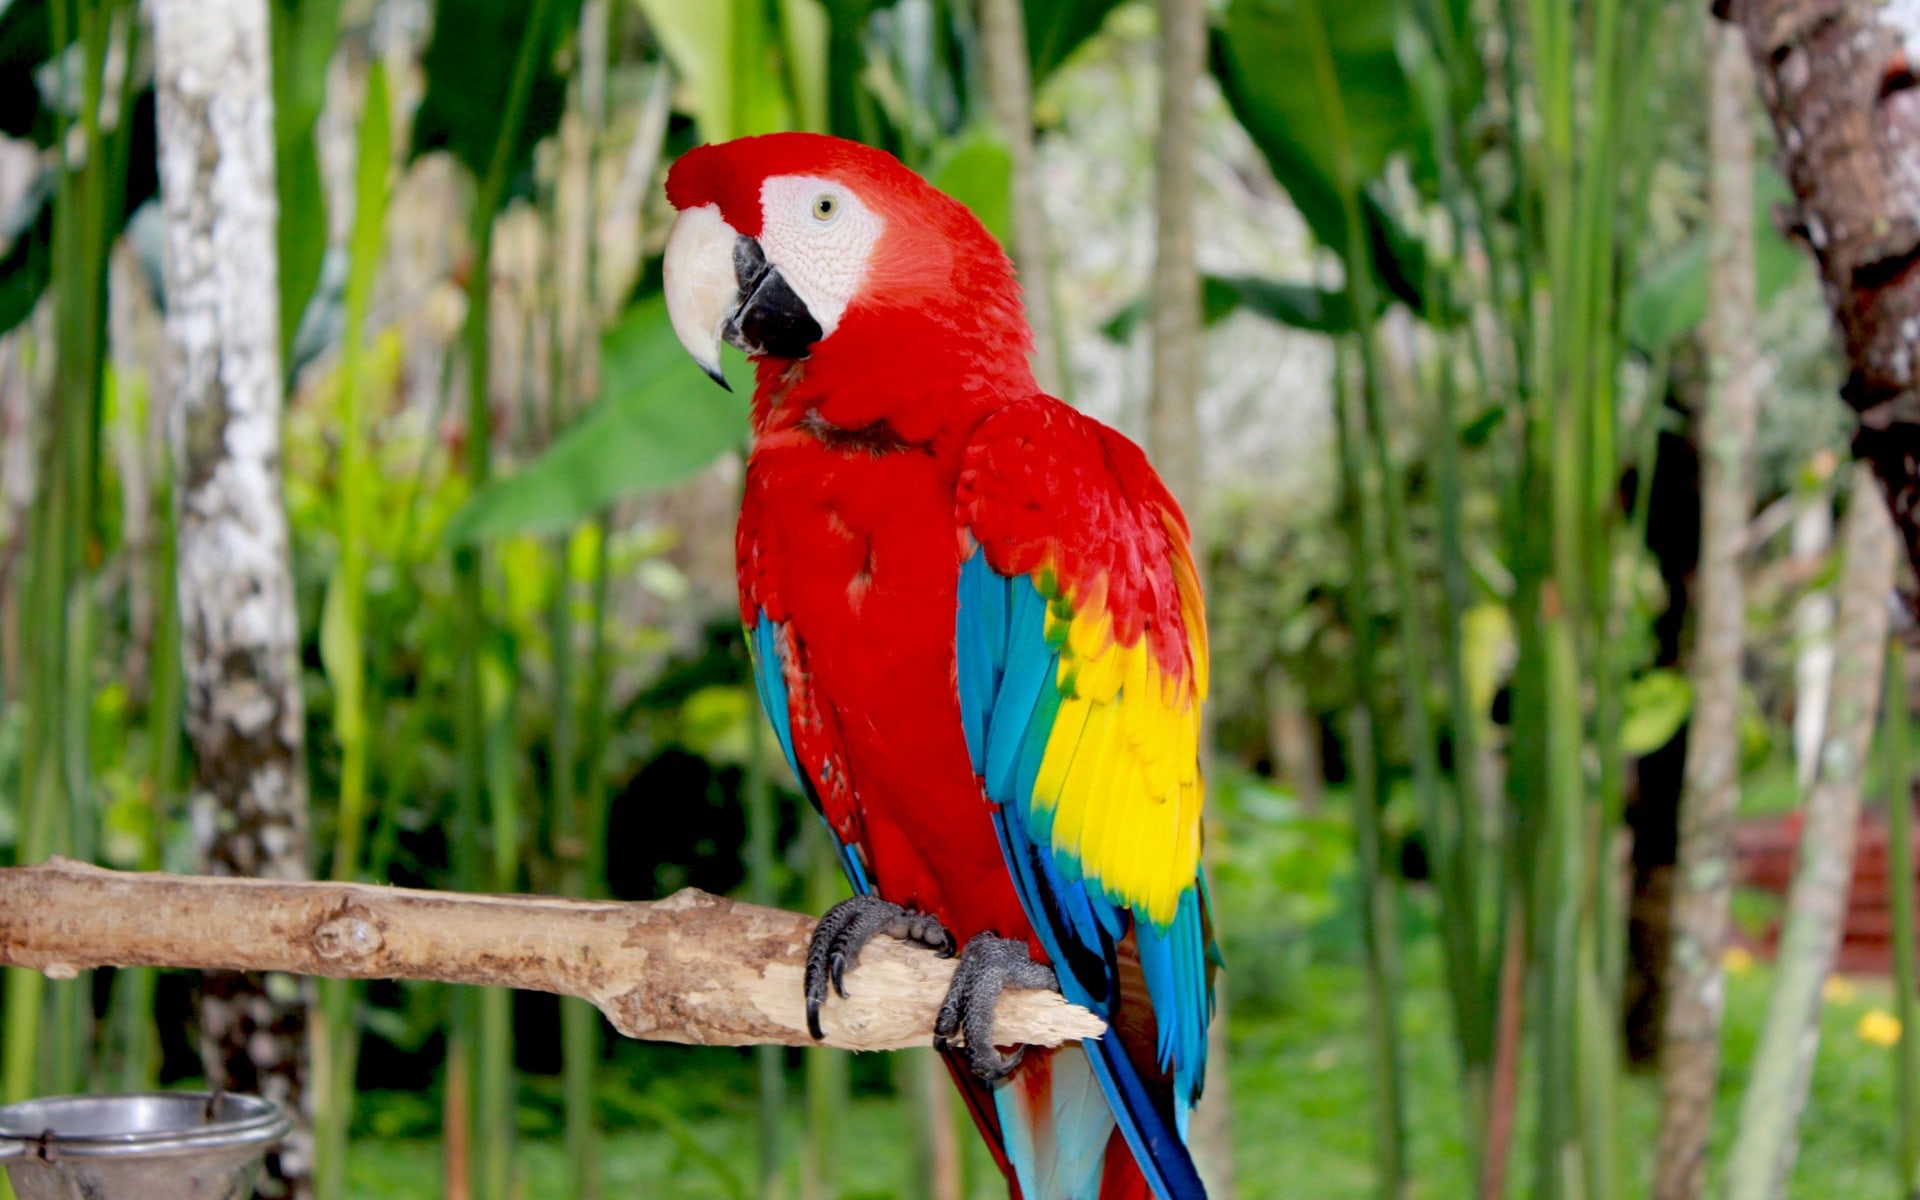 Red macaw photo